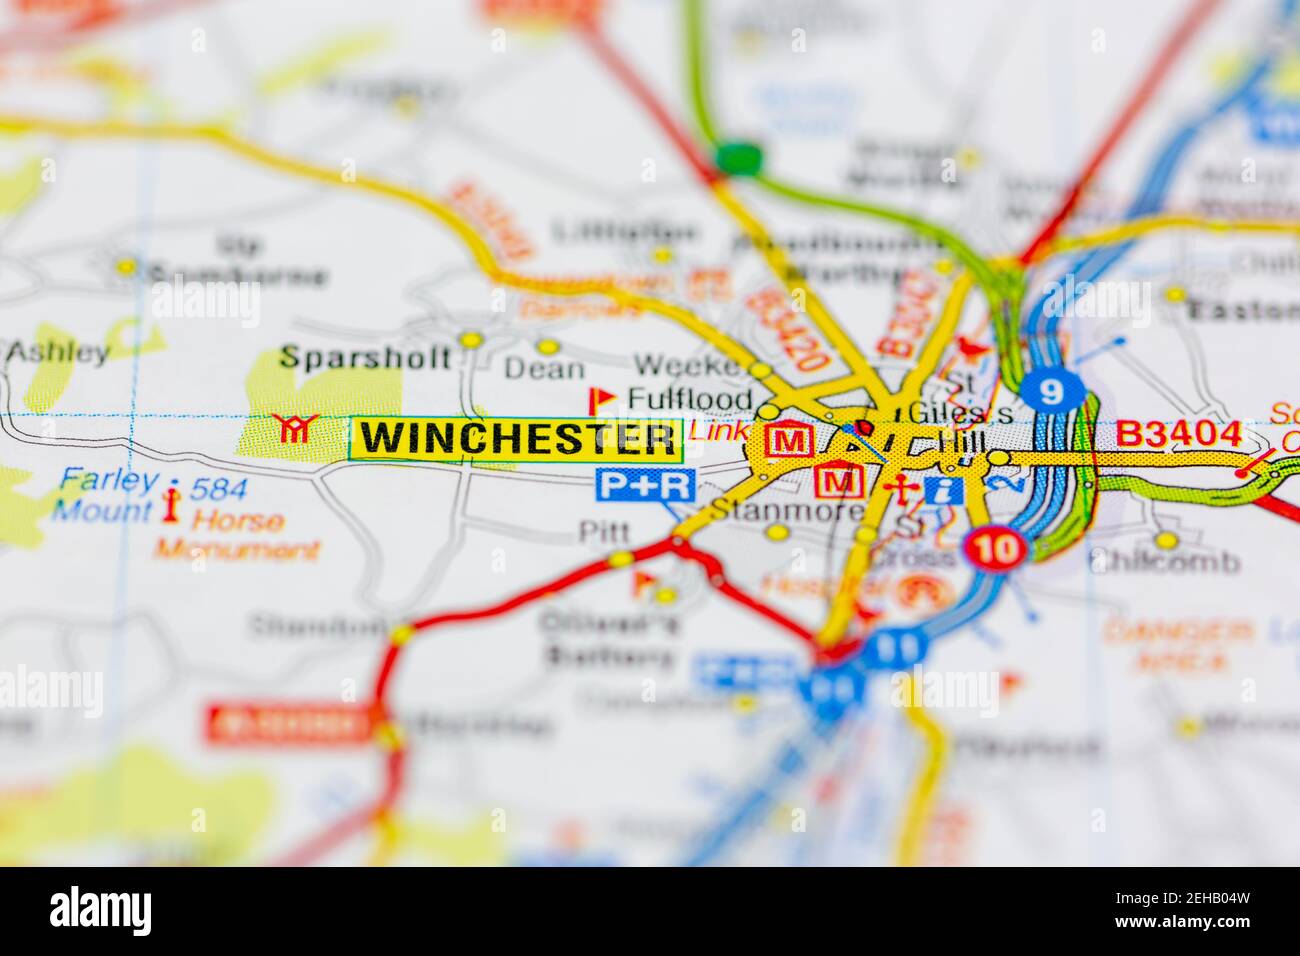 Winchester and surrounding areas shown on a road map or Geography map Stock Photo